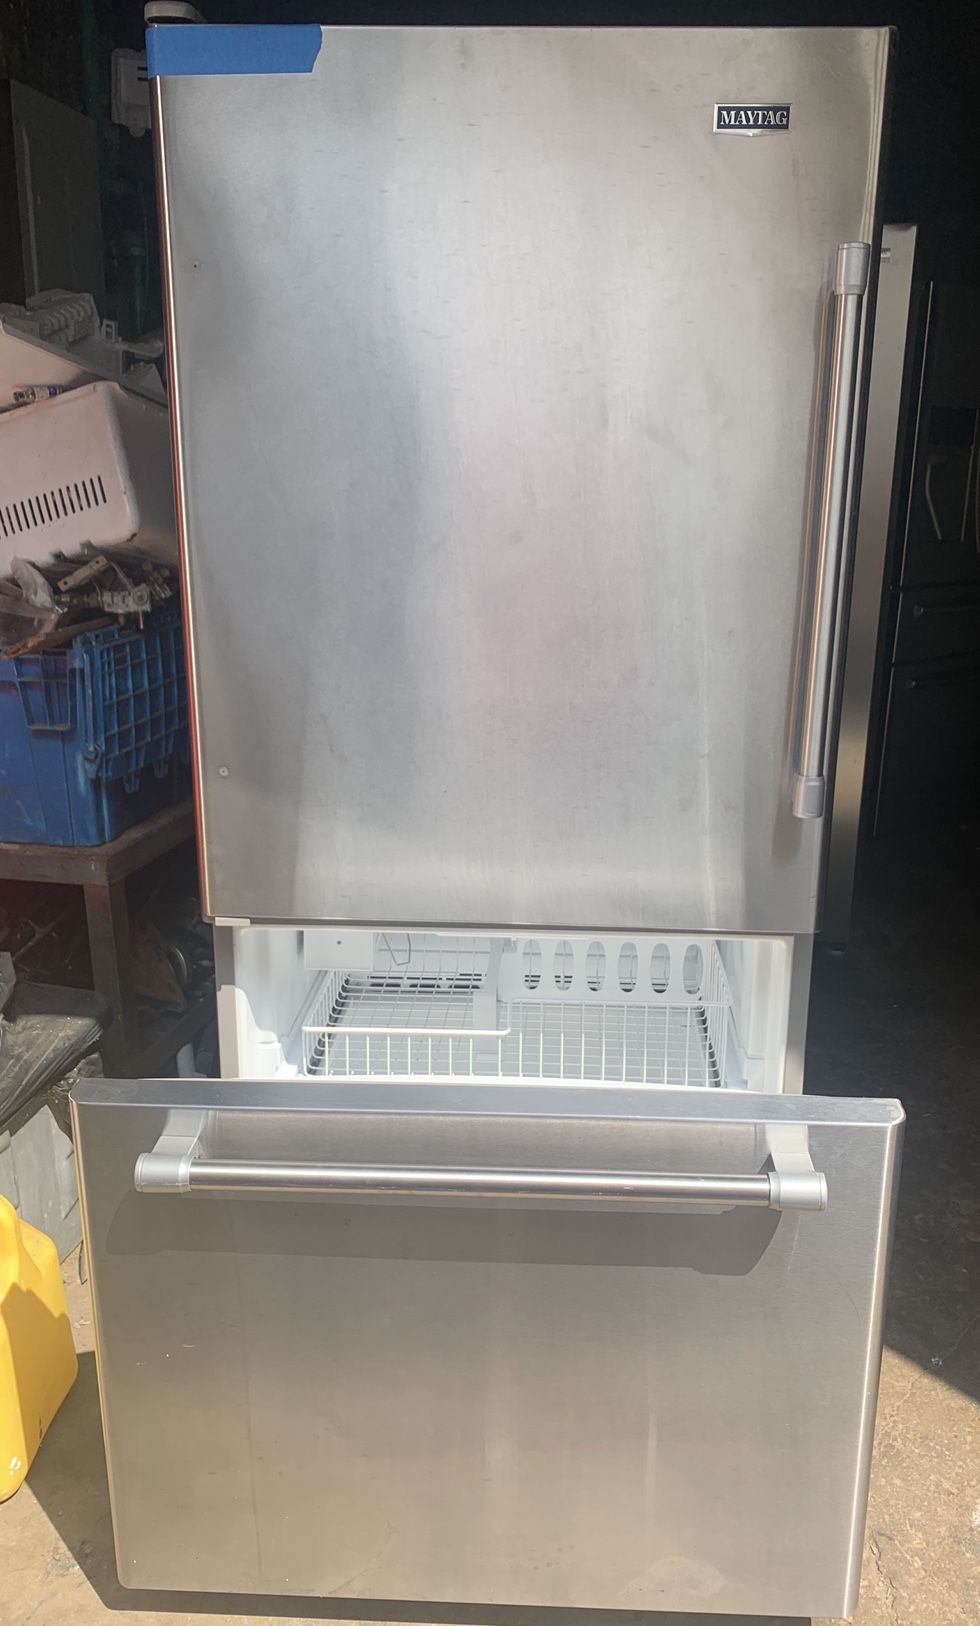 Maytag 33in. bottom freezer refrigerator in excellent conditions with 4 months warranty